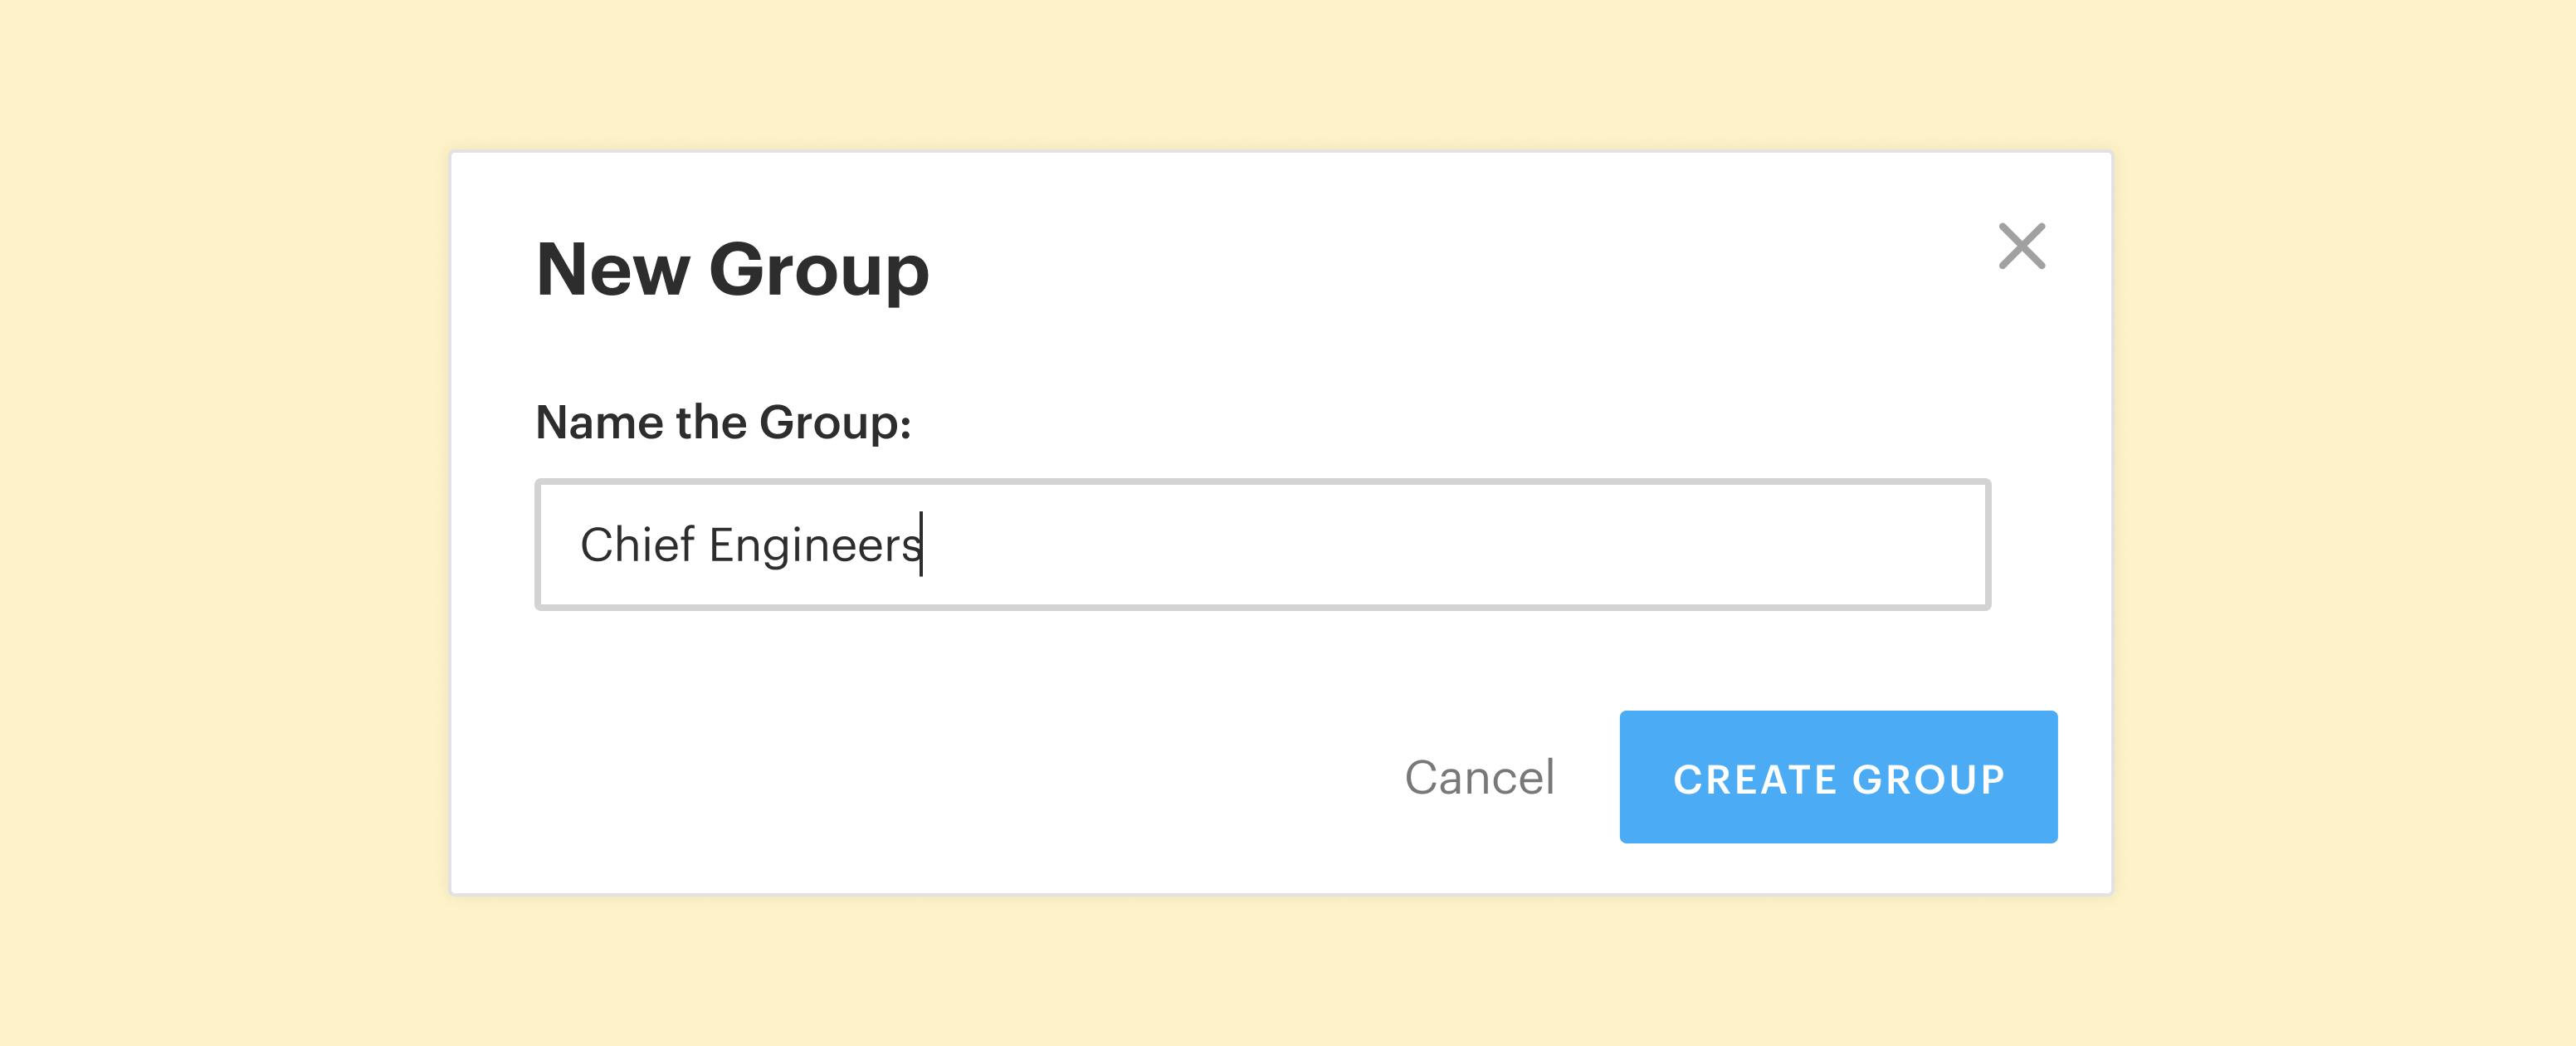 You set the name for the Group you want to create.